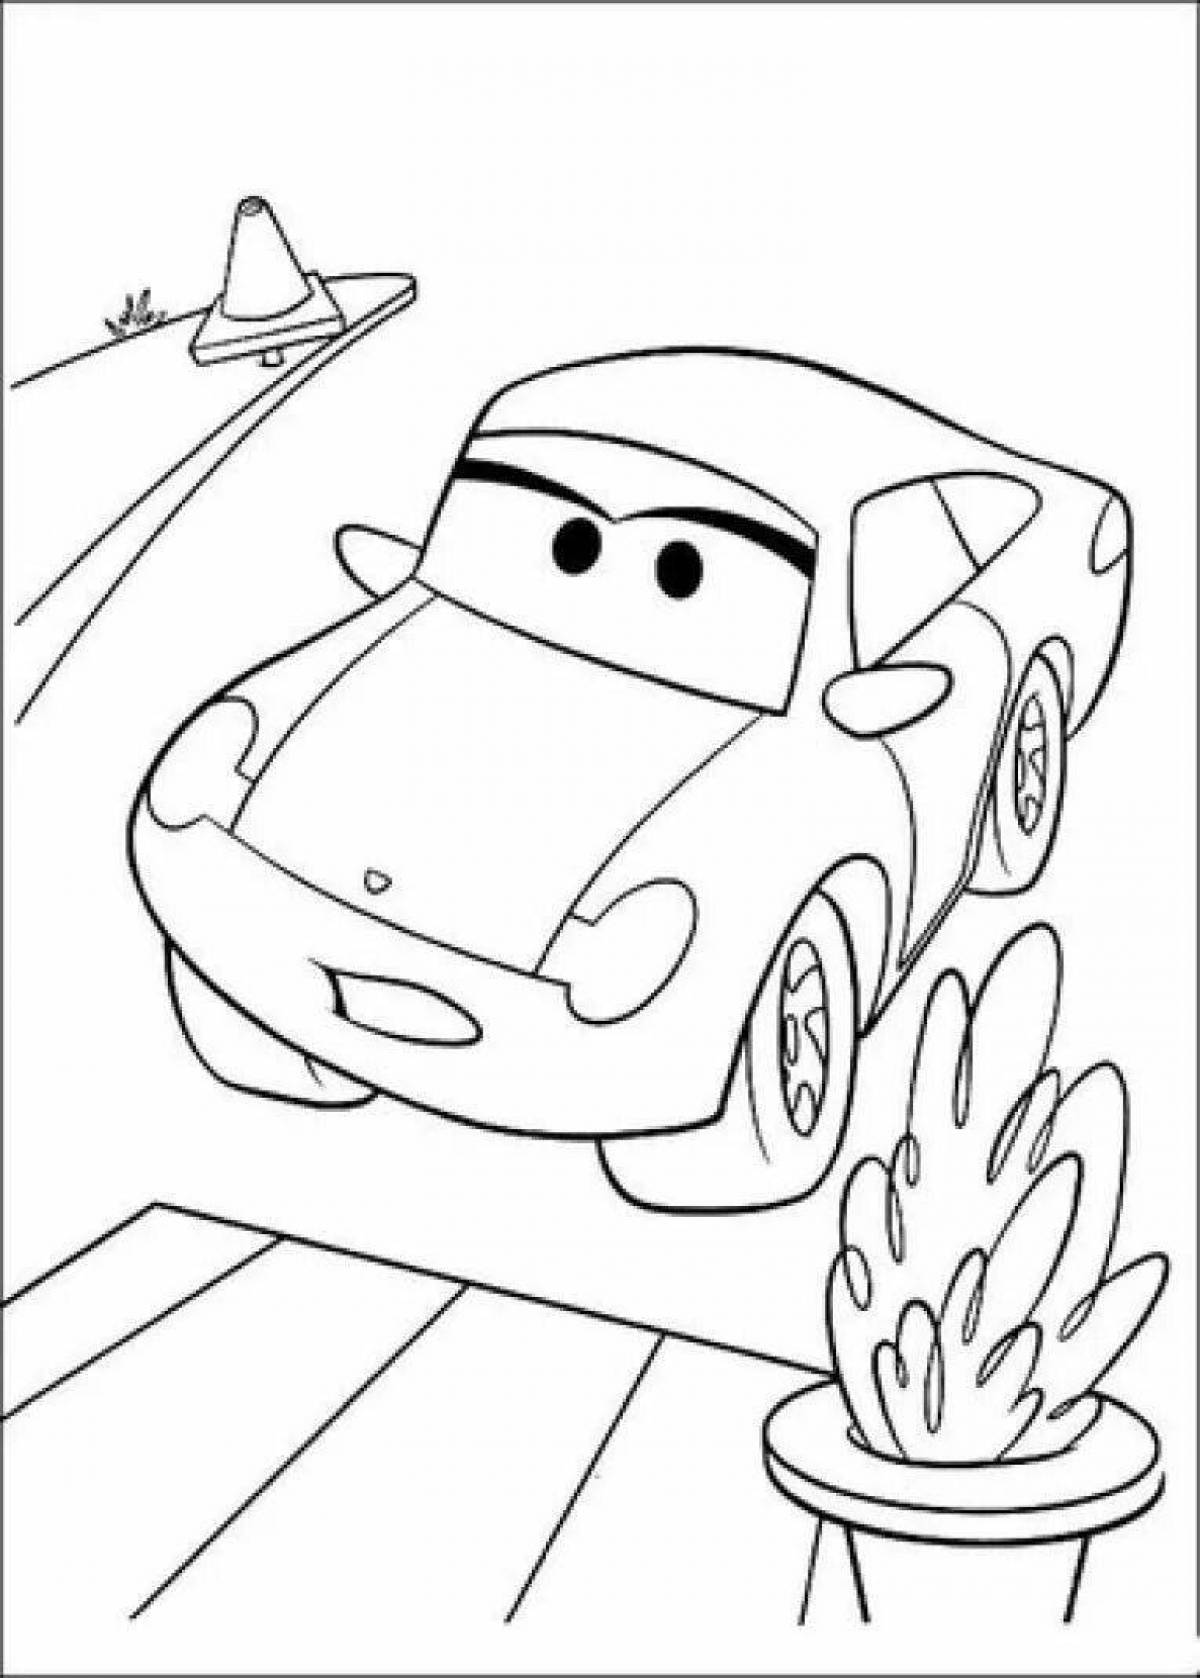 Coloring page marvelous sally cars